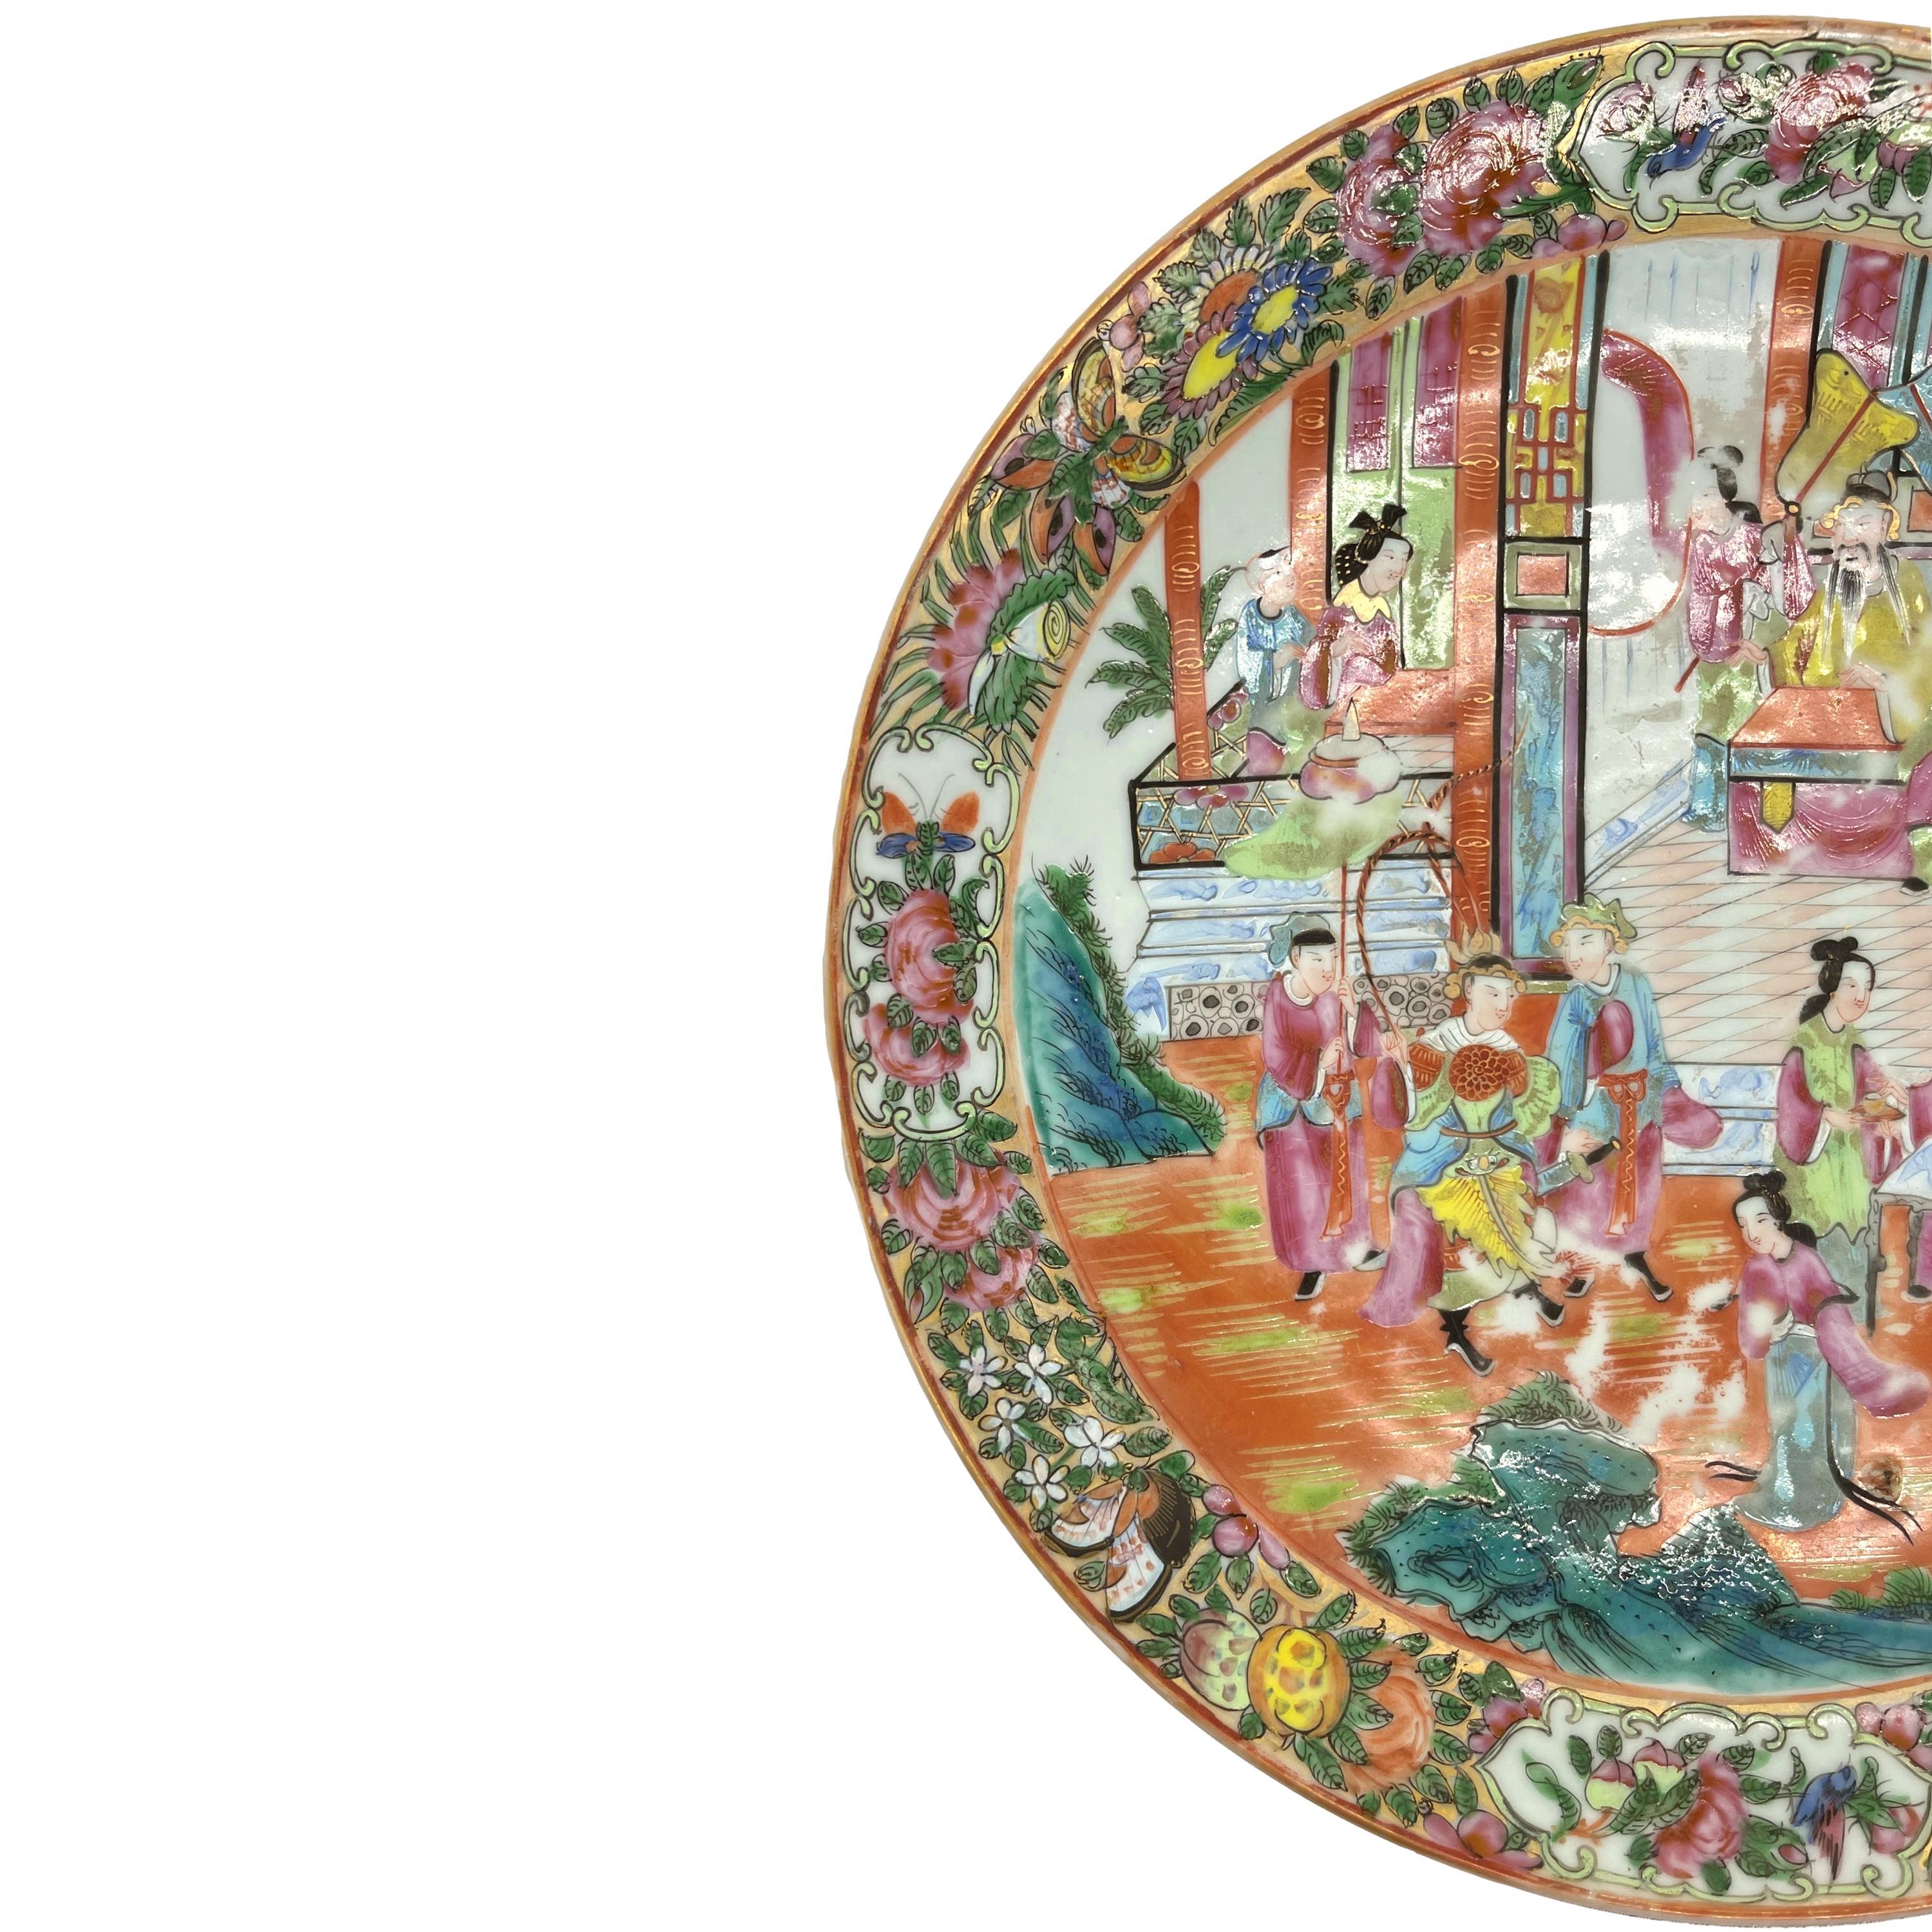 A Canton Famille Rose 12.75-inch charger, the polychrome enameled surface depicting an active palace scene with a distinguished warrior and attendants being presented to the Emporer, the border with an arrangement of butterflies, flowers, and fruit